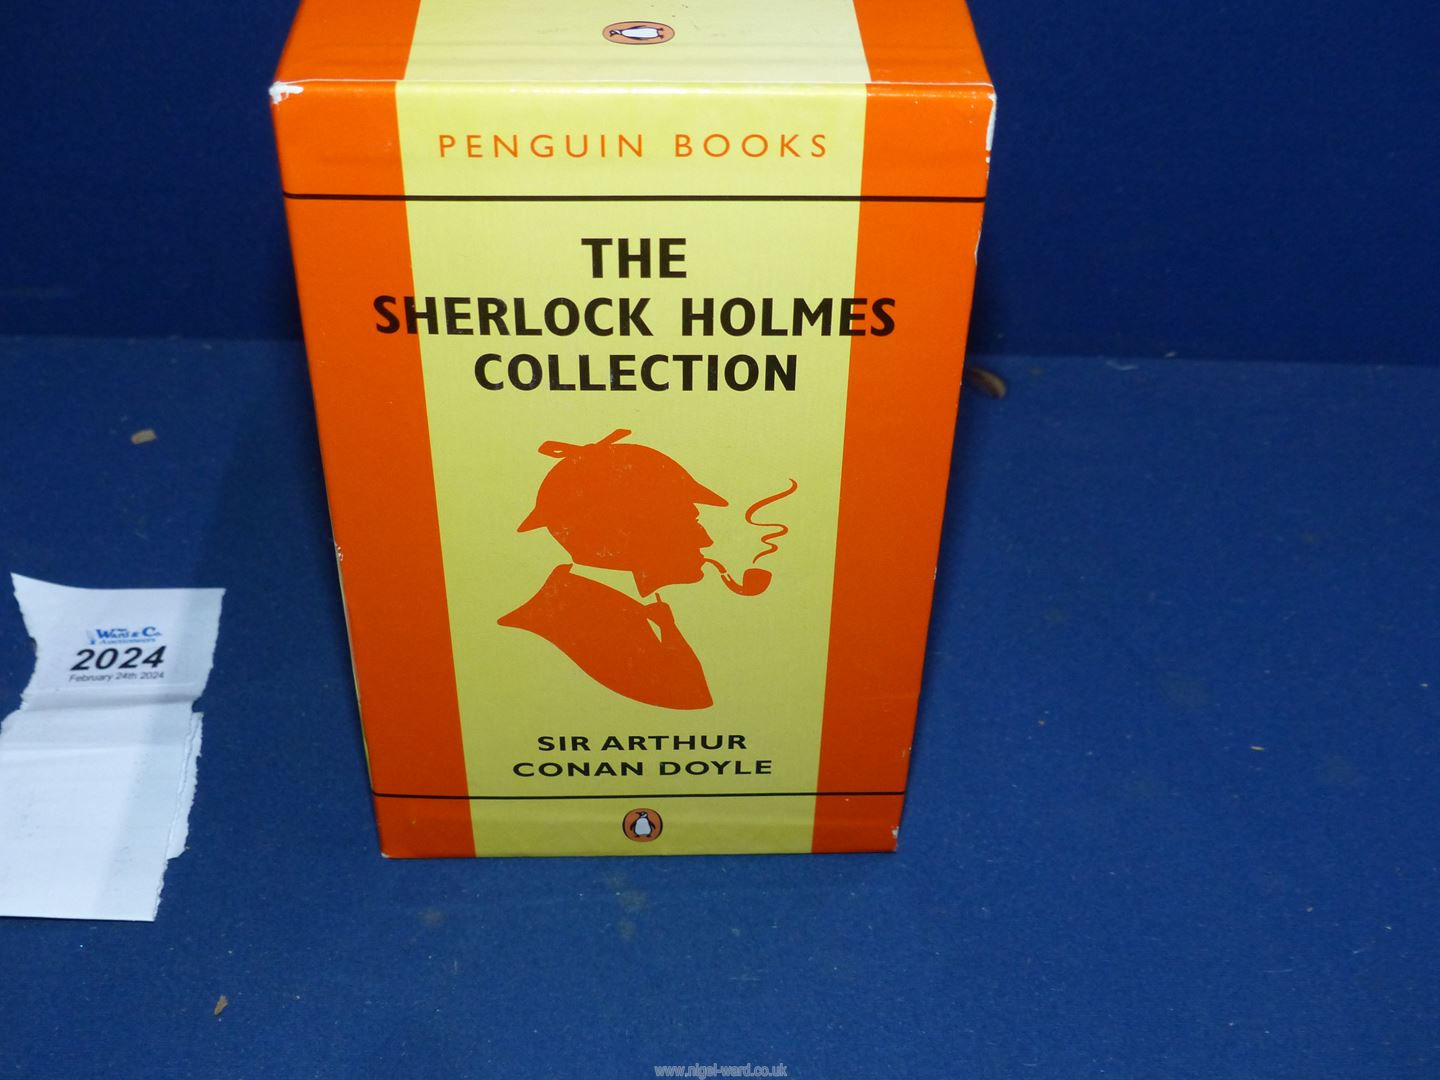 A boxed set of Penguin books by Sir Arthur Conan Doyle 'The Sherlock Holmes Collection'. - Image 2 of 3